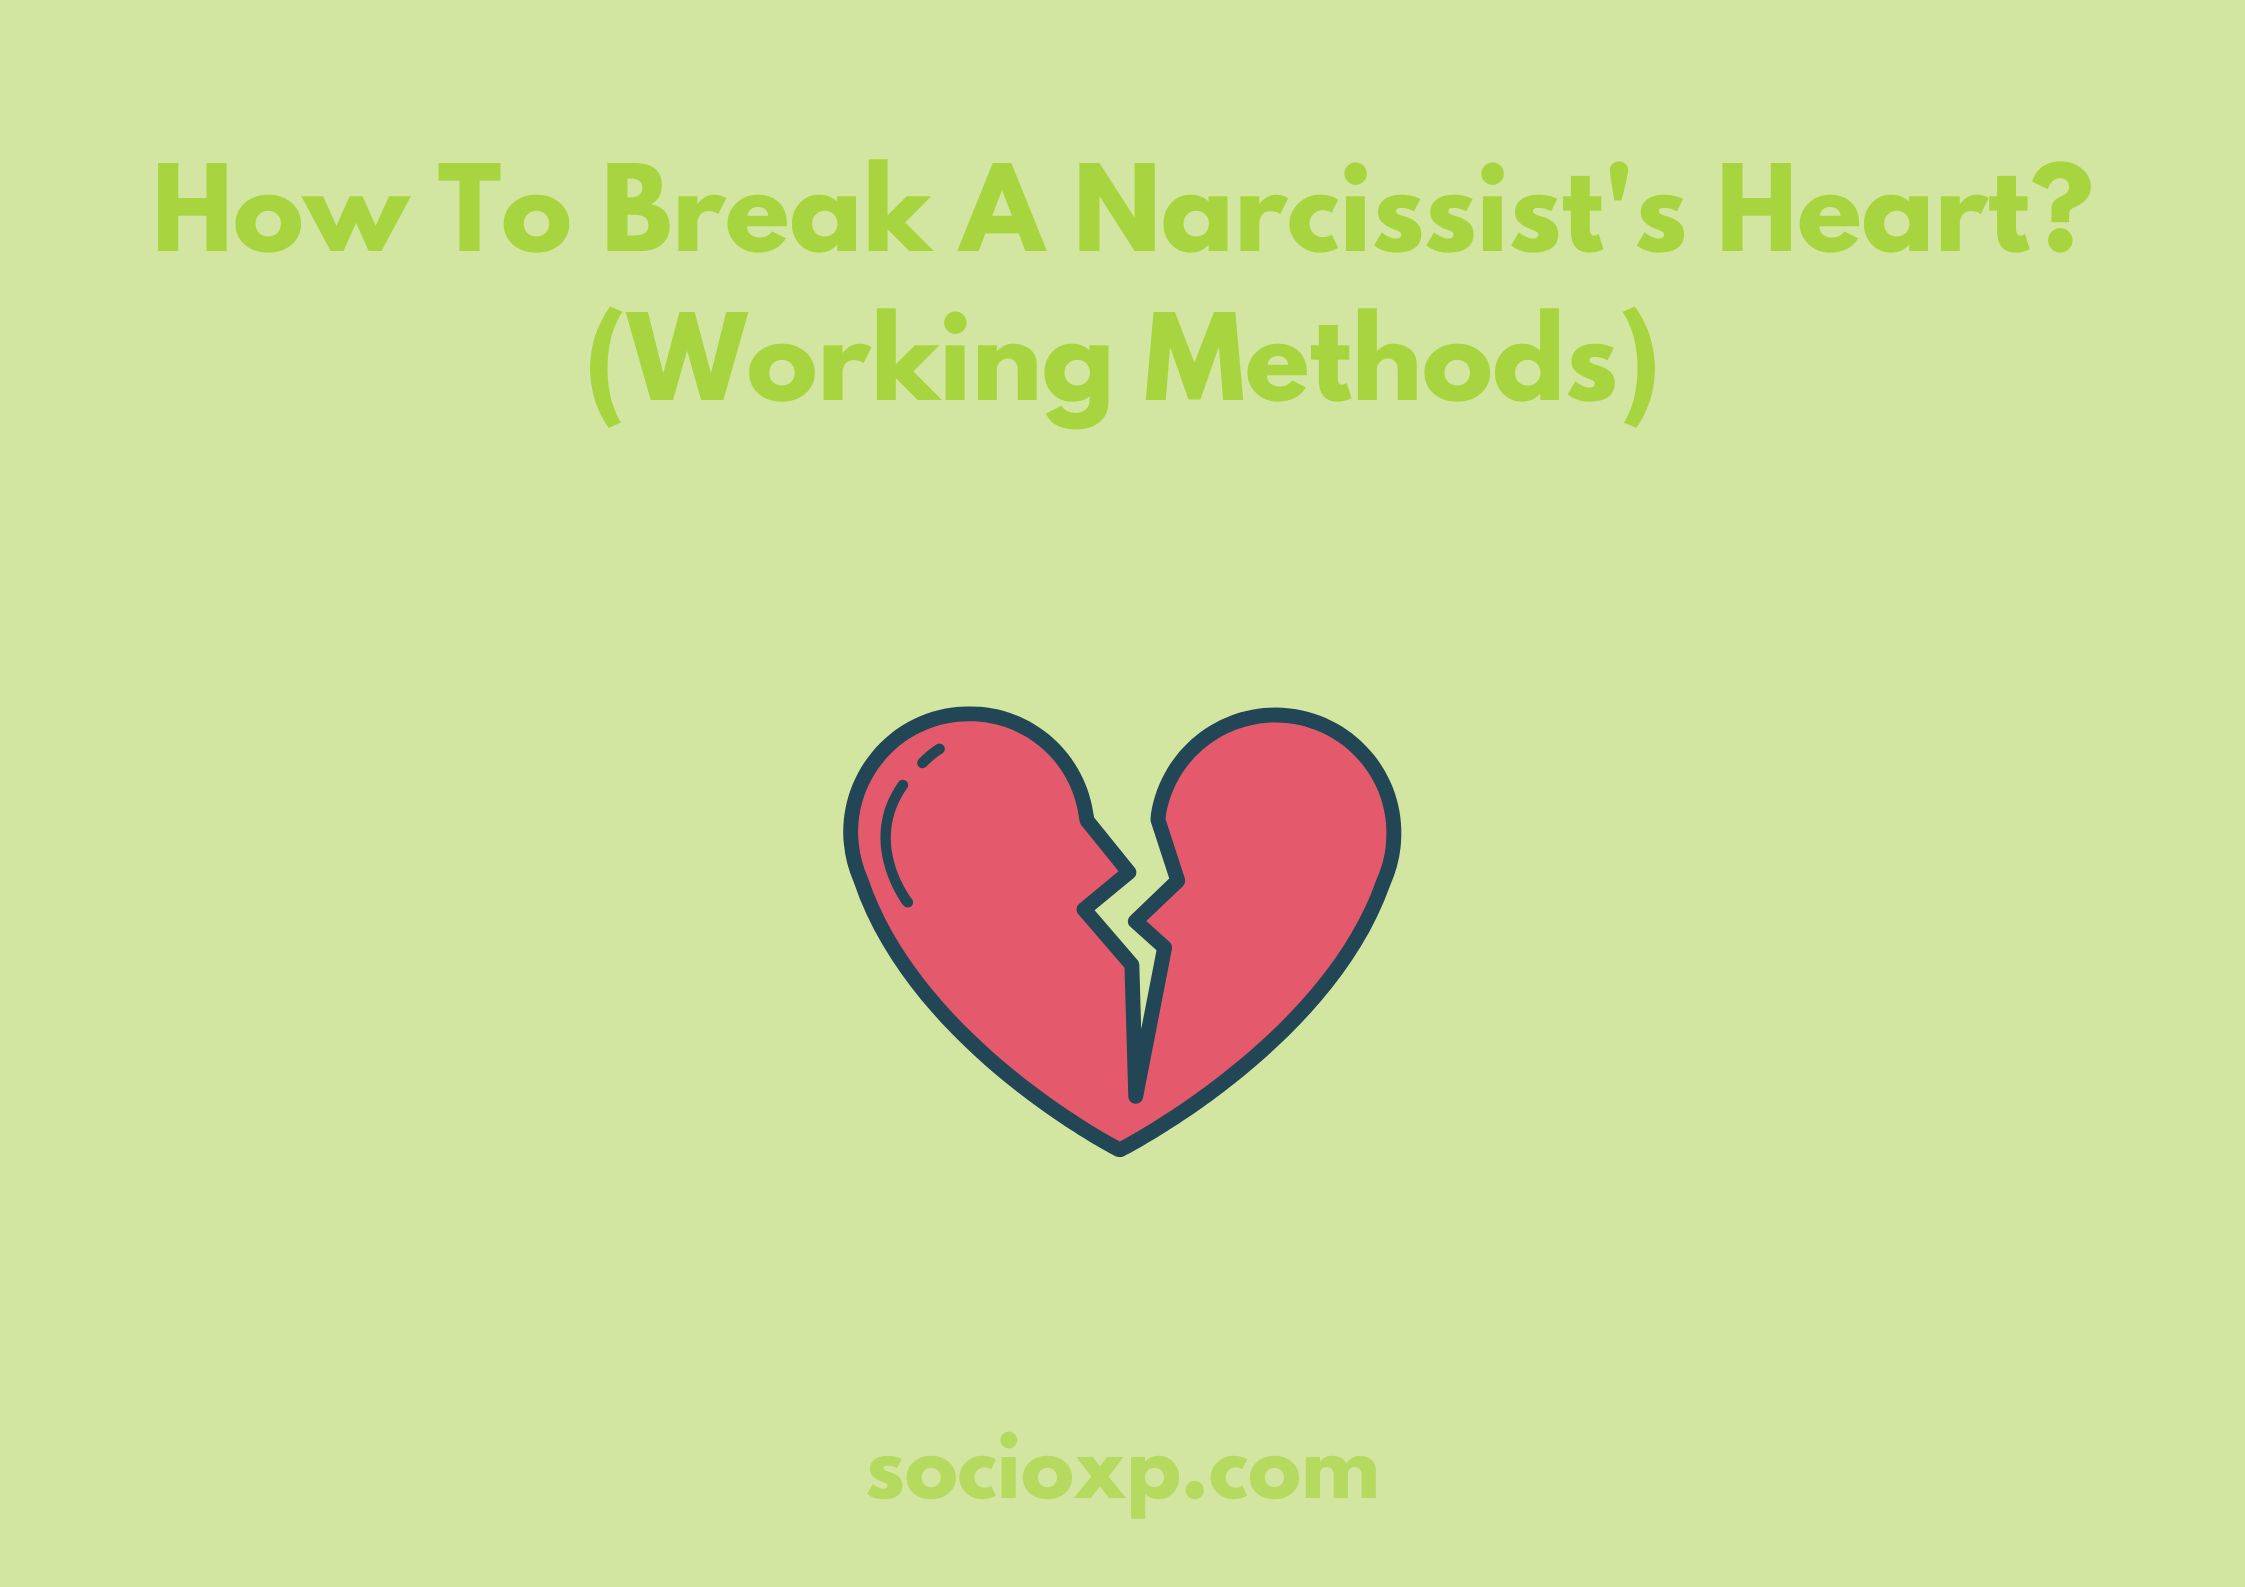 How To Break A Narcissist's Heart? (Working Methods)